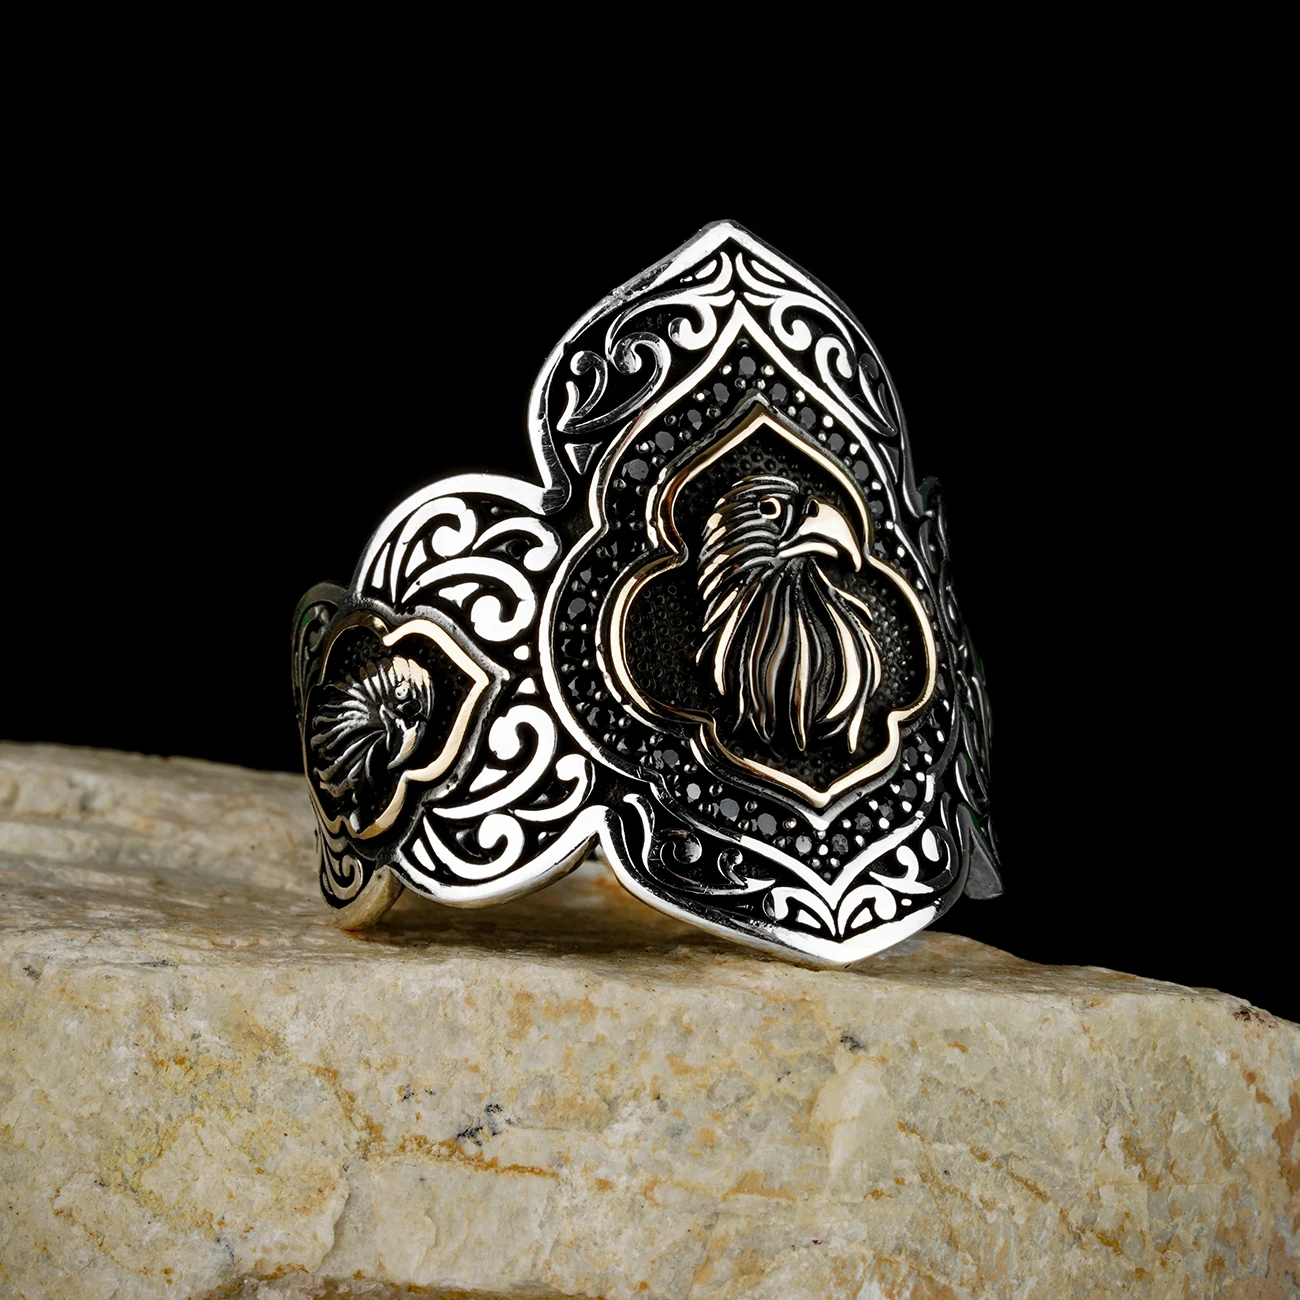 Original Archer Ring Thumb Eagle Stoneless 925 Sterling Silver Elegantly Designed All Size Jewelry Gift High Guality 12gr